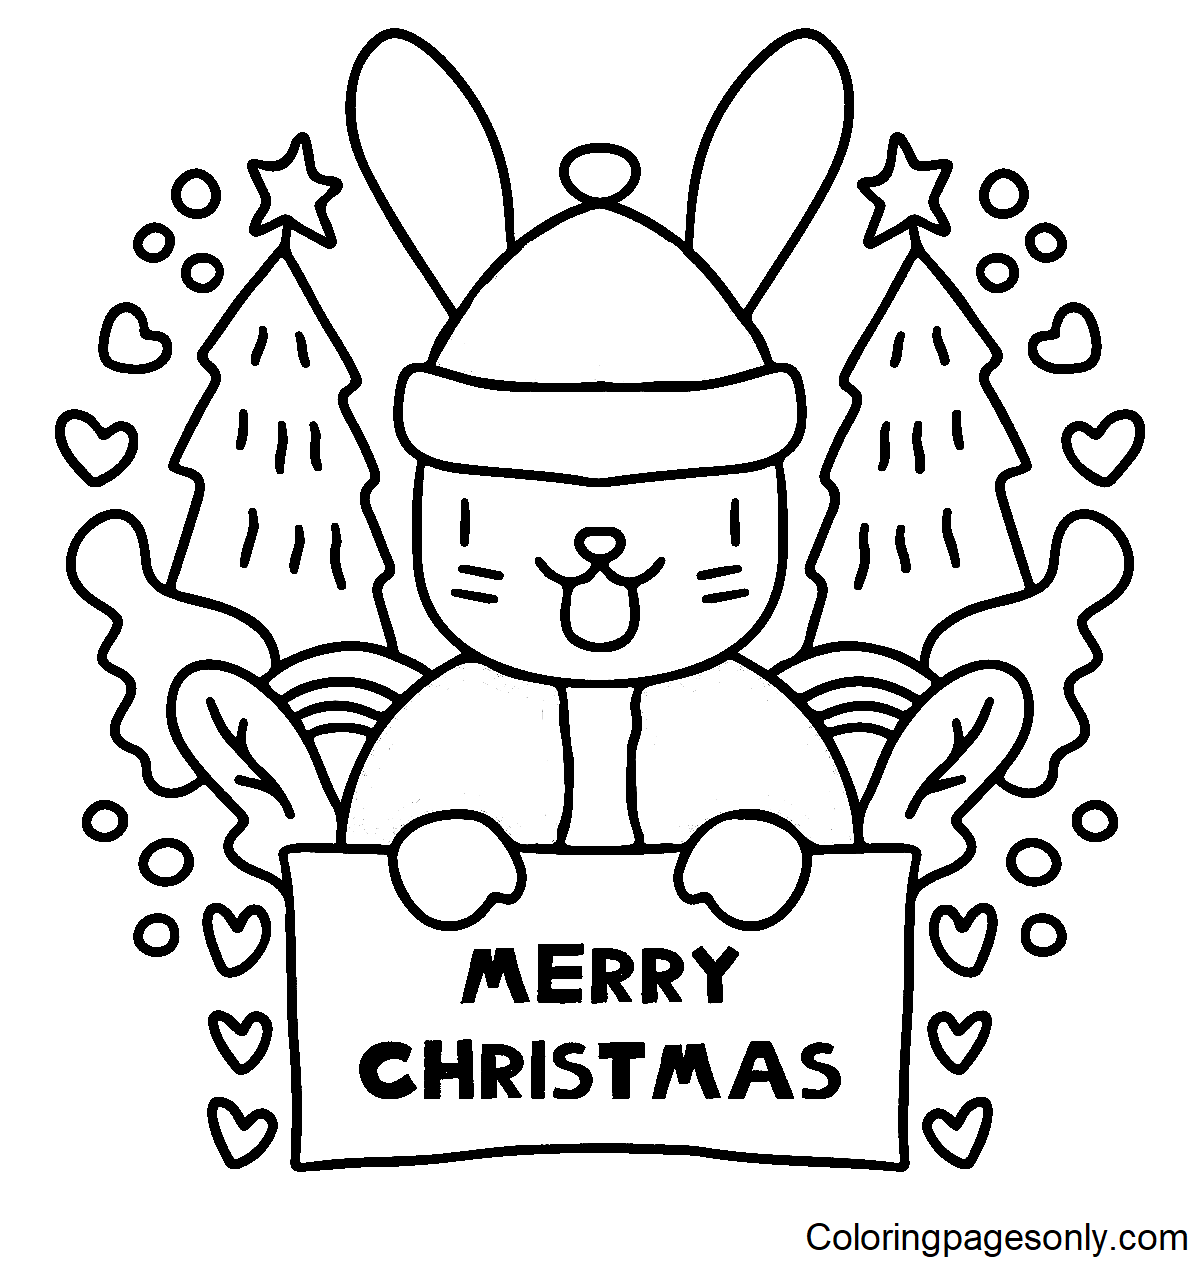 Bunny Merry Christmas Coloring Page